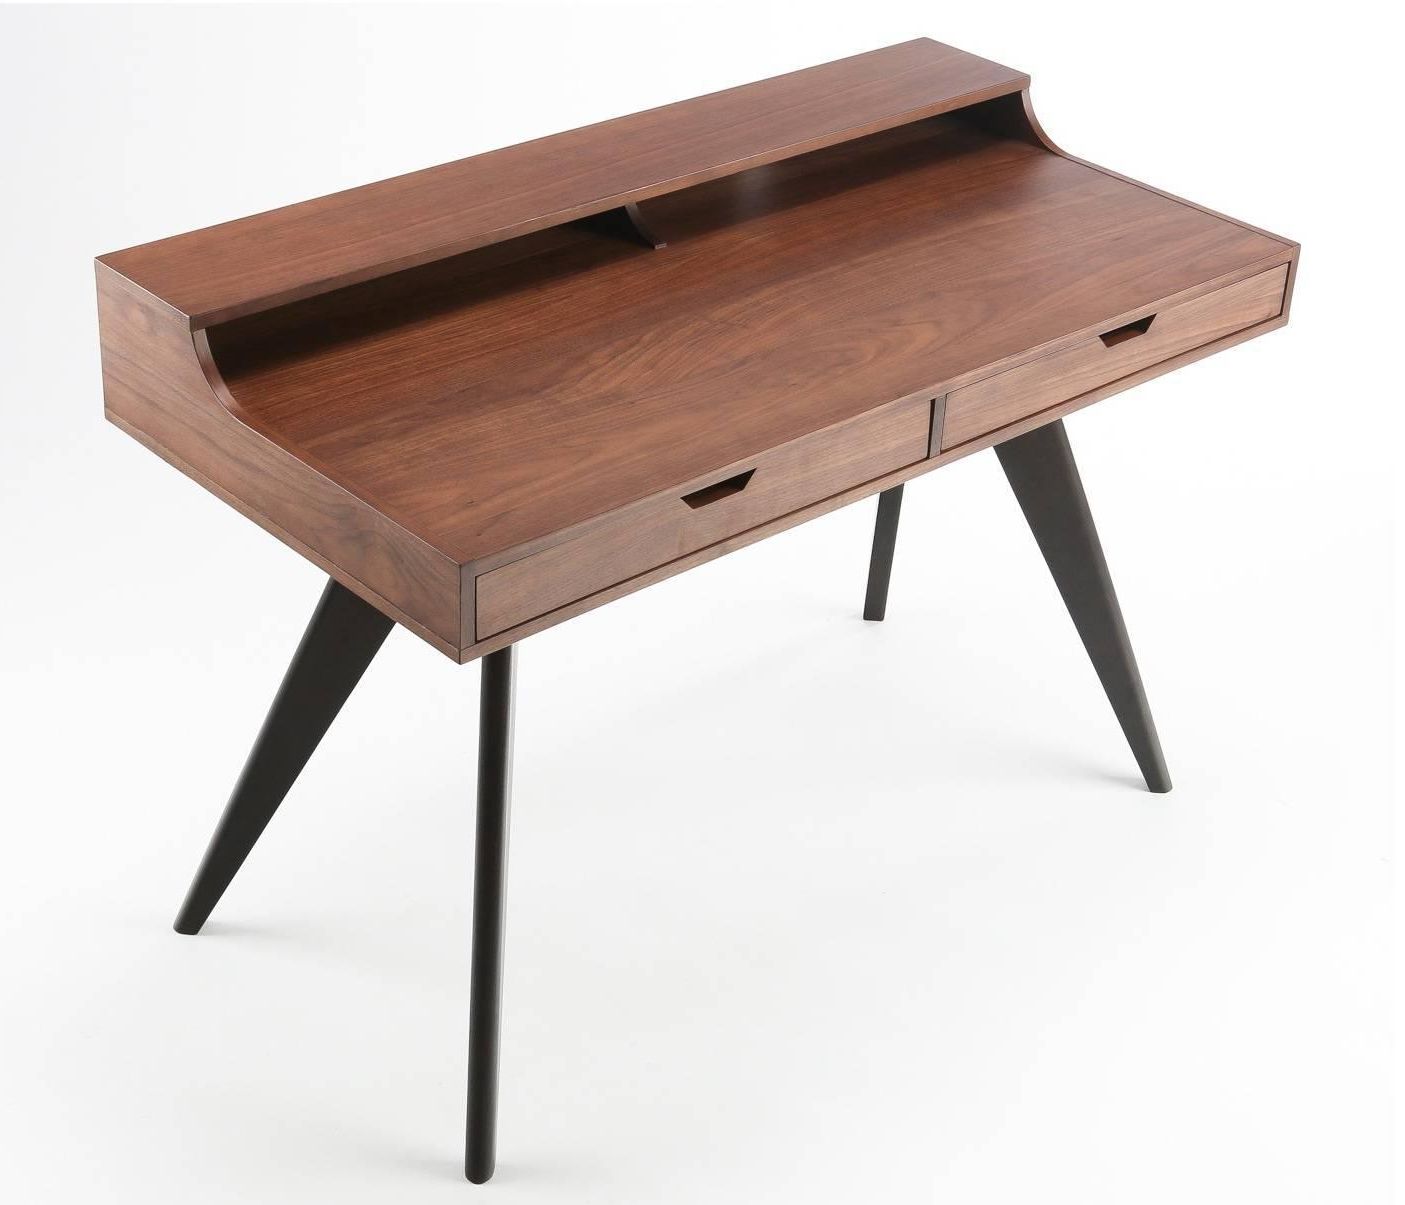 2019 Contemporary Walnut And Wenge Veneer Writing Desk With Two Drawers At Regarding Glass And Walnut Modern Writing Desks (View 6 of 15)